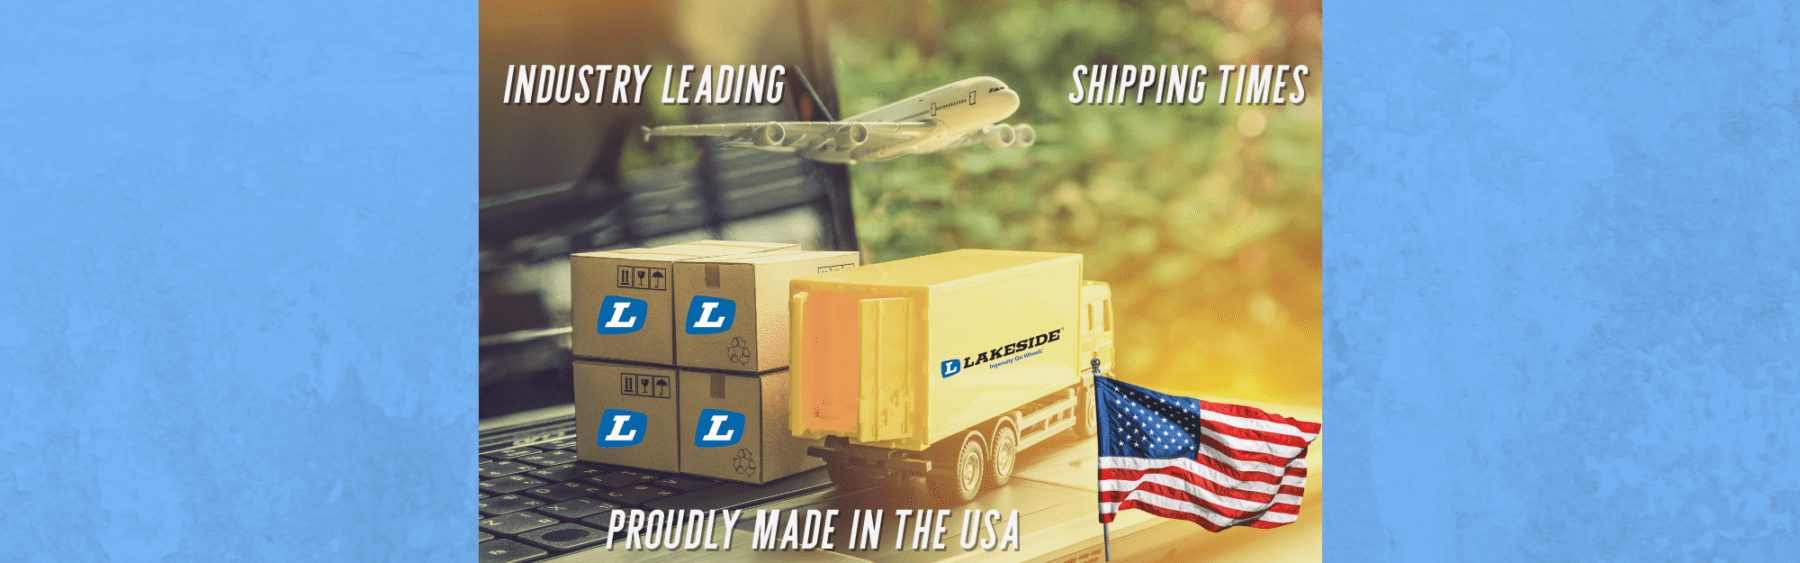 shipping truck and boxes with description: Industry Leading Shipping Times, Proudly made in the USA